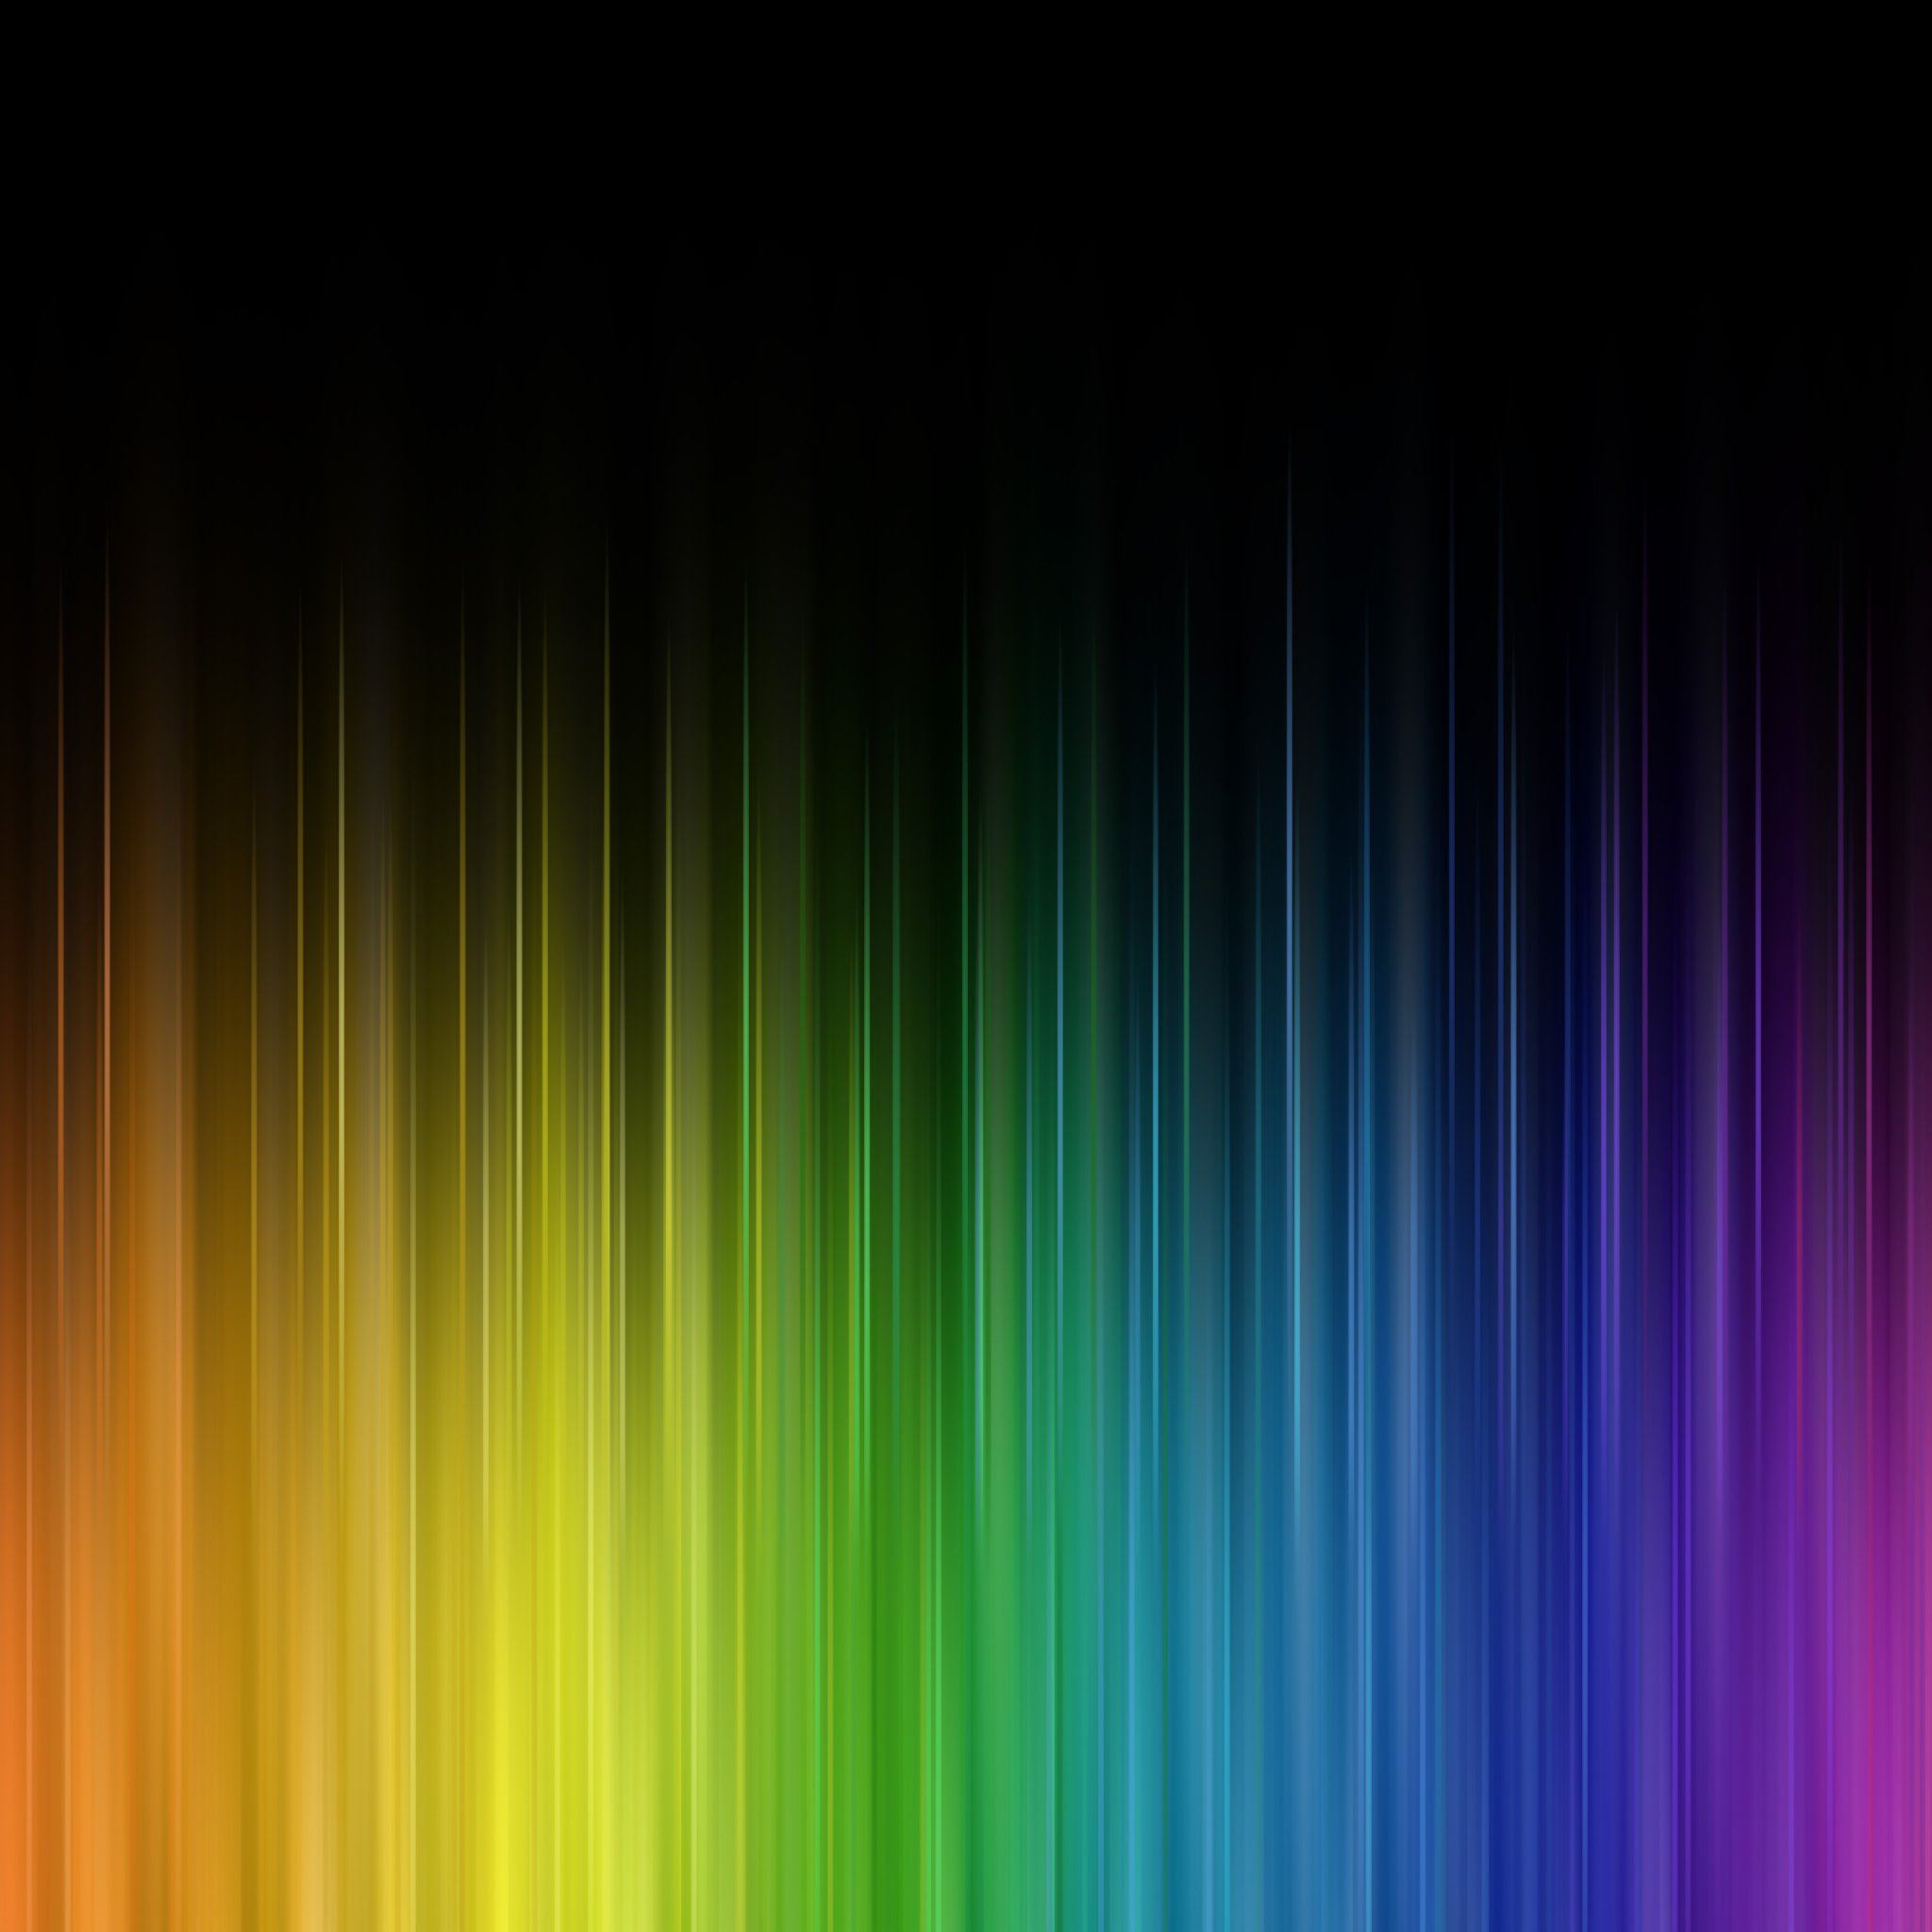 Rainbow Colorful Background iPad Air wallpaper 